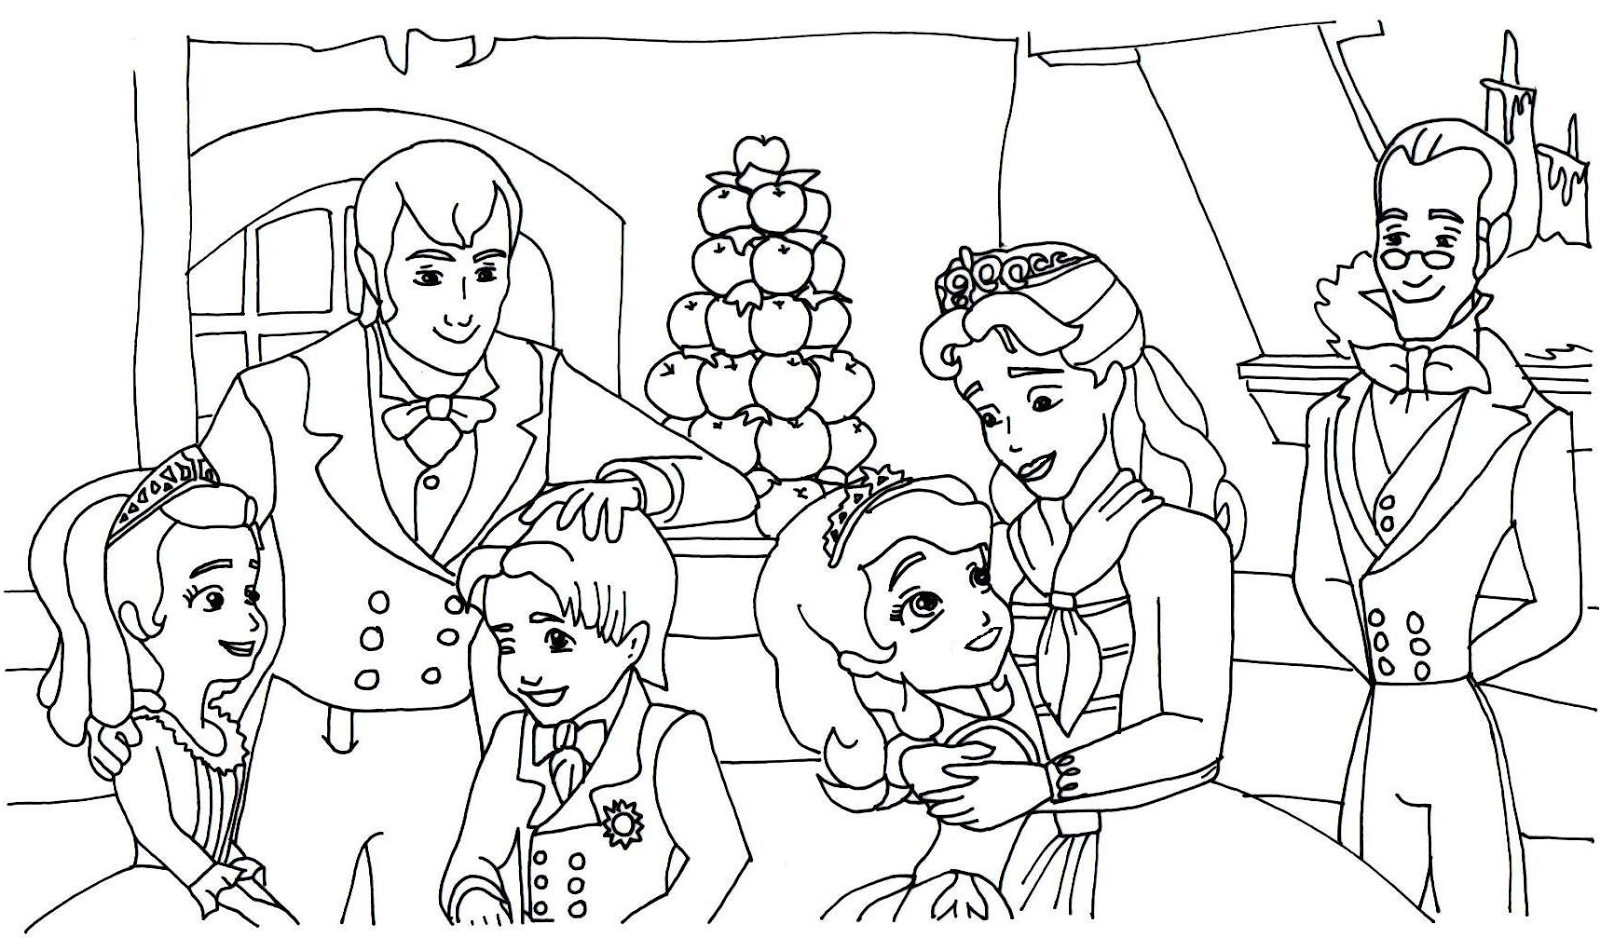 Sofia The First Printable Coloring Pages
 Sofia The First Coloring Pages Free Sofia the First